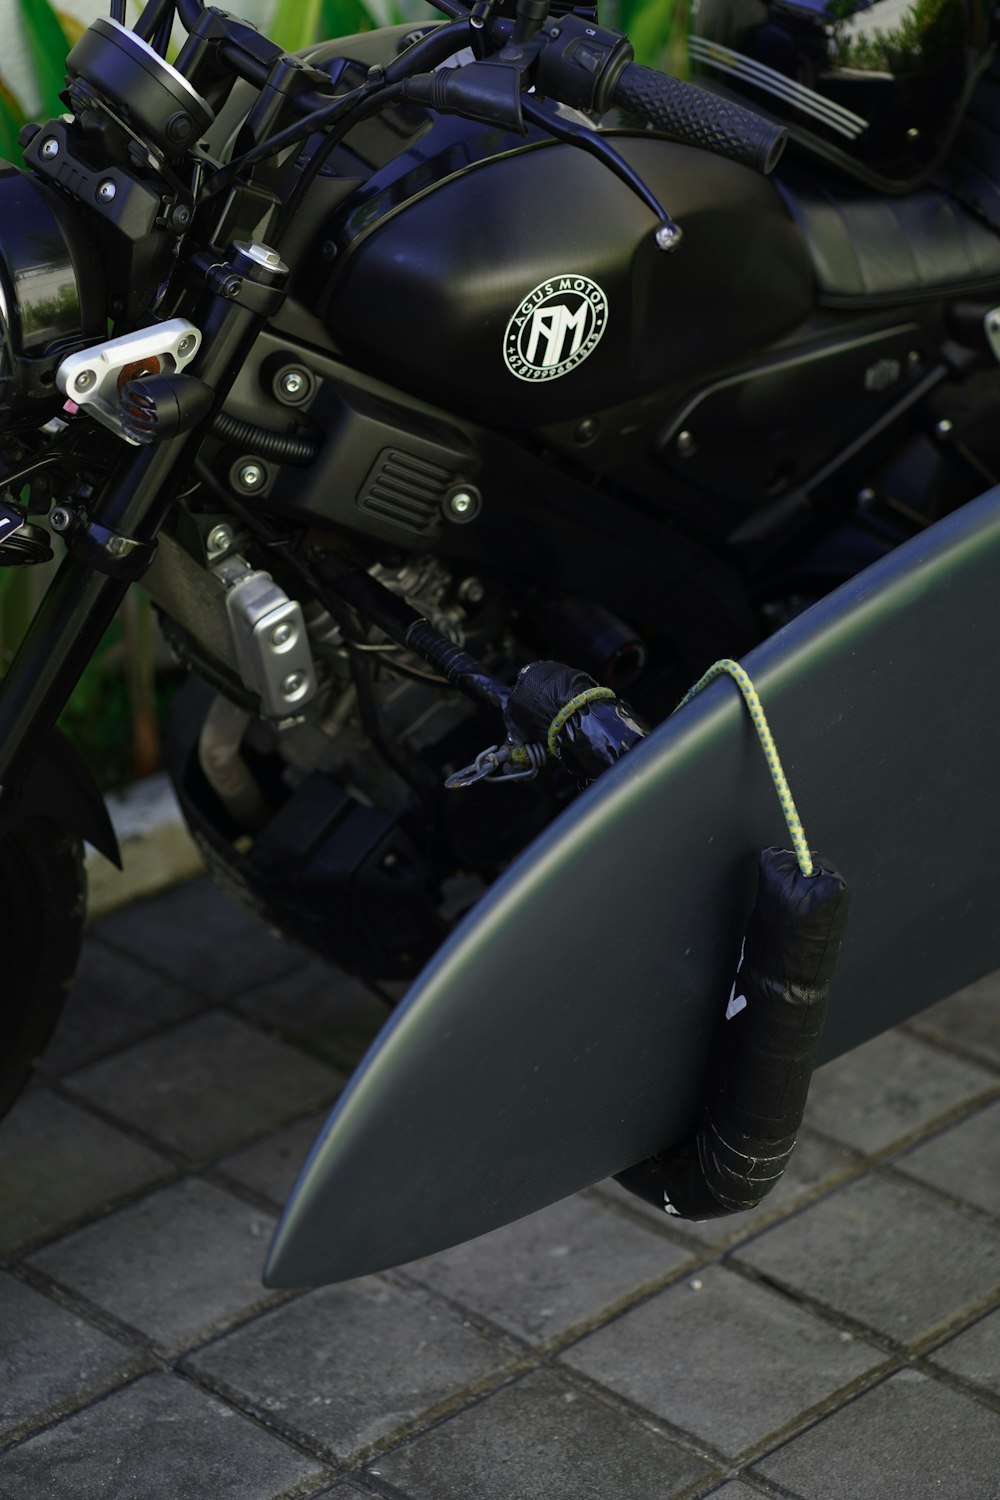 a black motorcycle with a surfboard attached to it